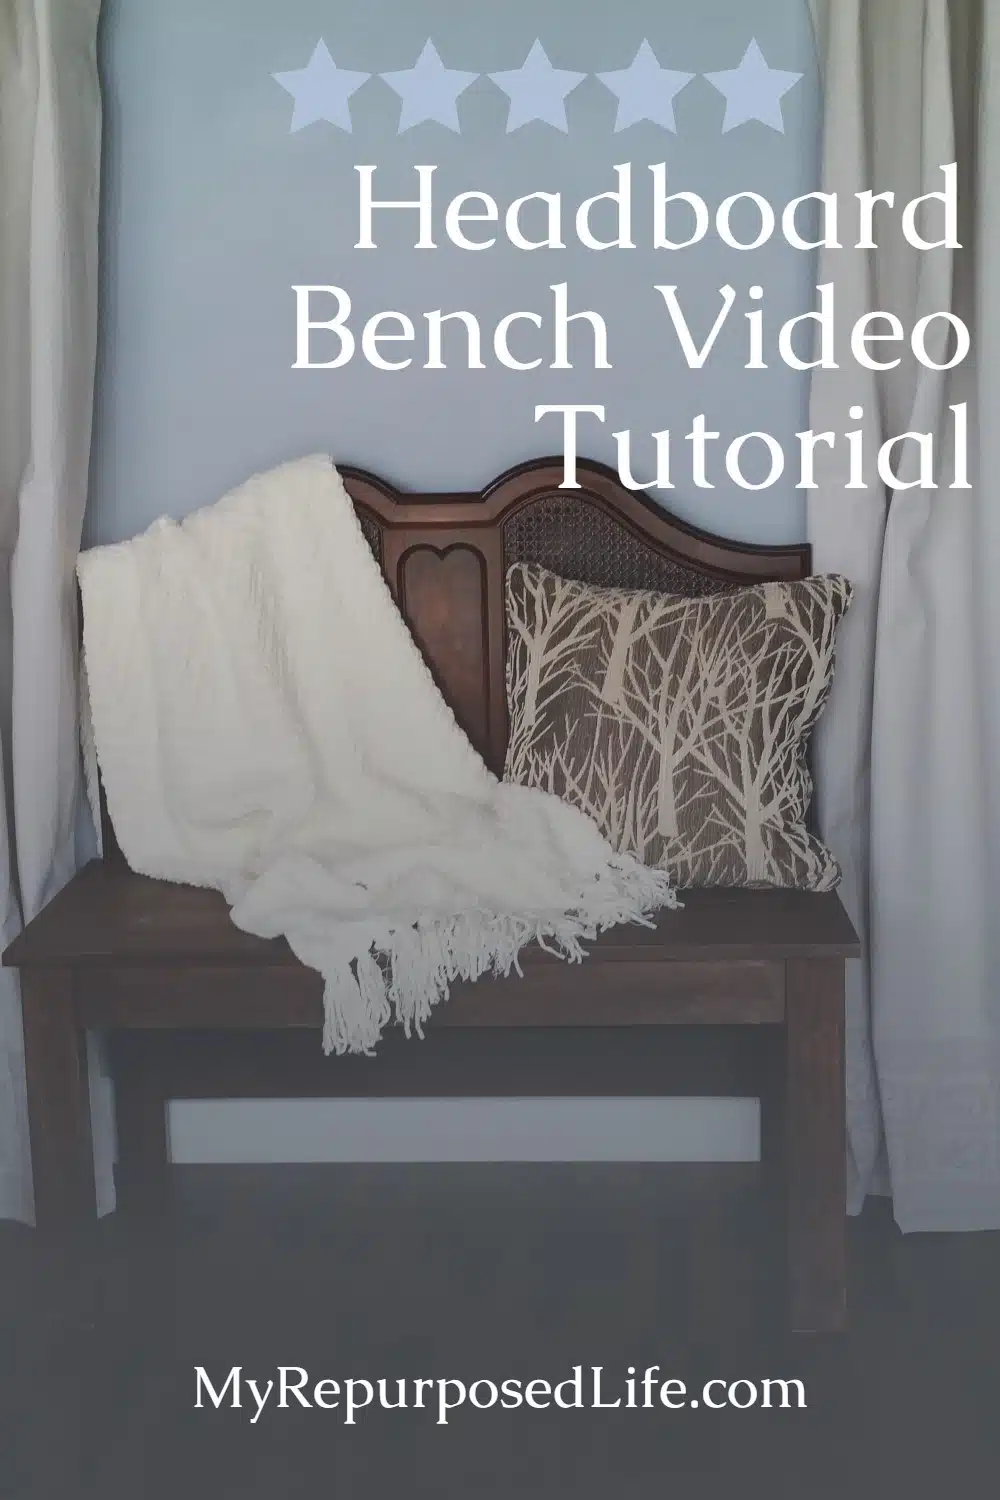 This quick, easy repurposed furniture headboard bench video will show you how easy it is to can make one this weekend. Step by step pictures. #MyRepurposedLife #repurposed #upcycled #furniture #headboard #bench #video #tutoral via @repurposedlife